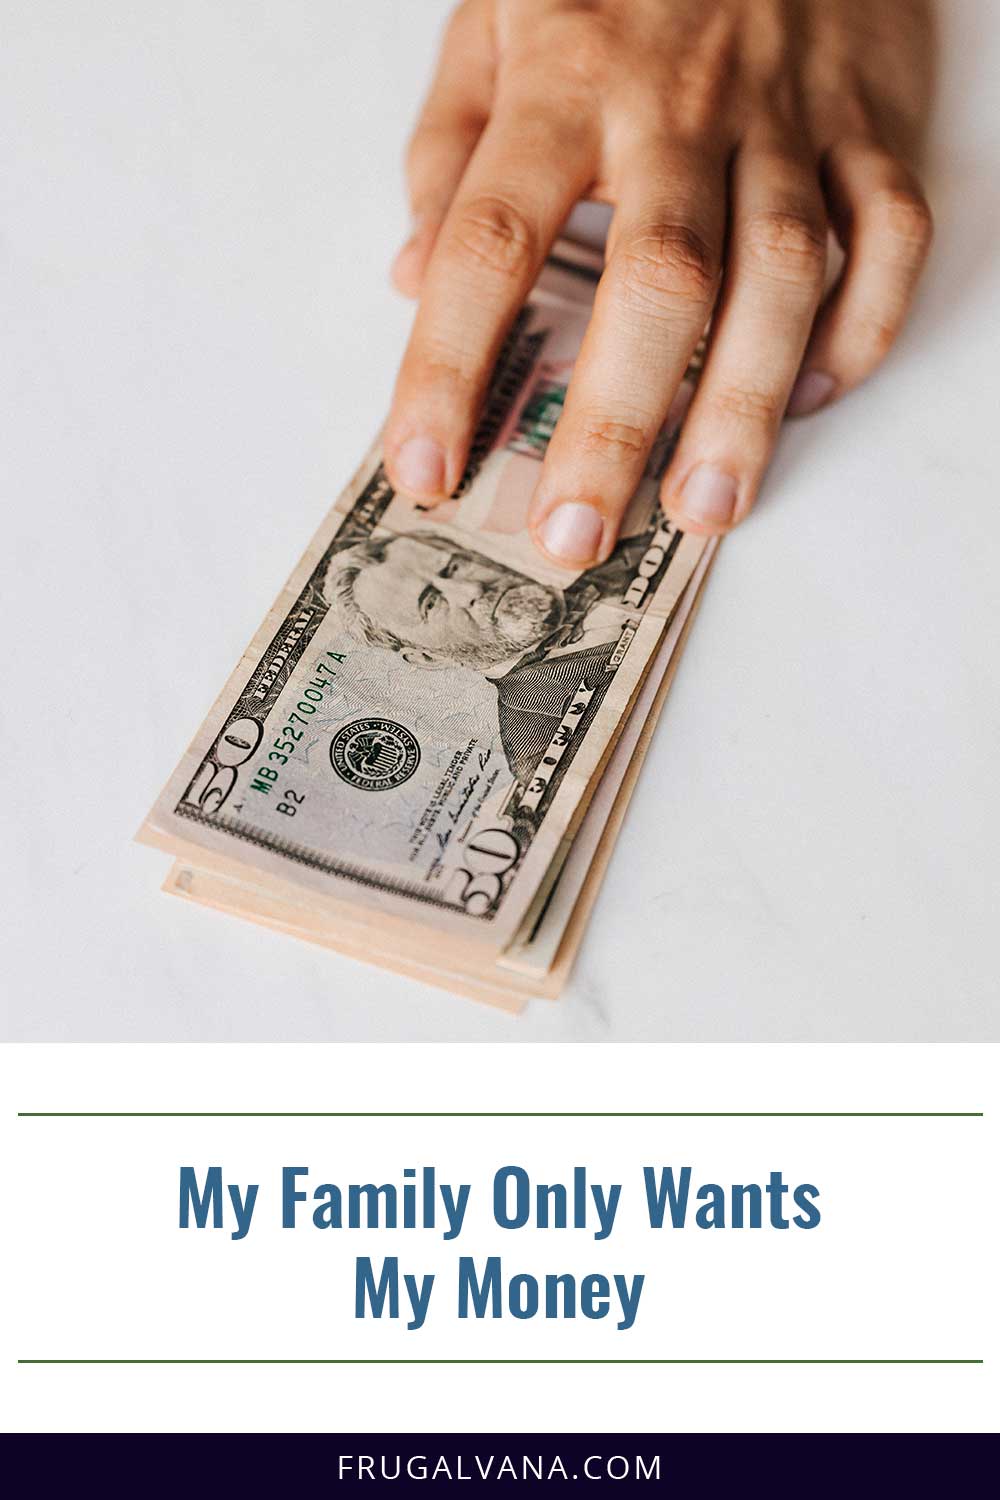 My Family Only Wants My Money